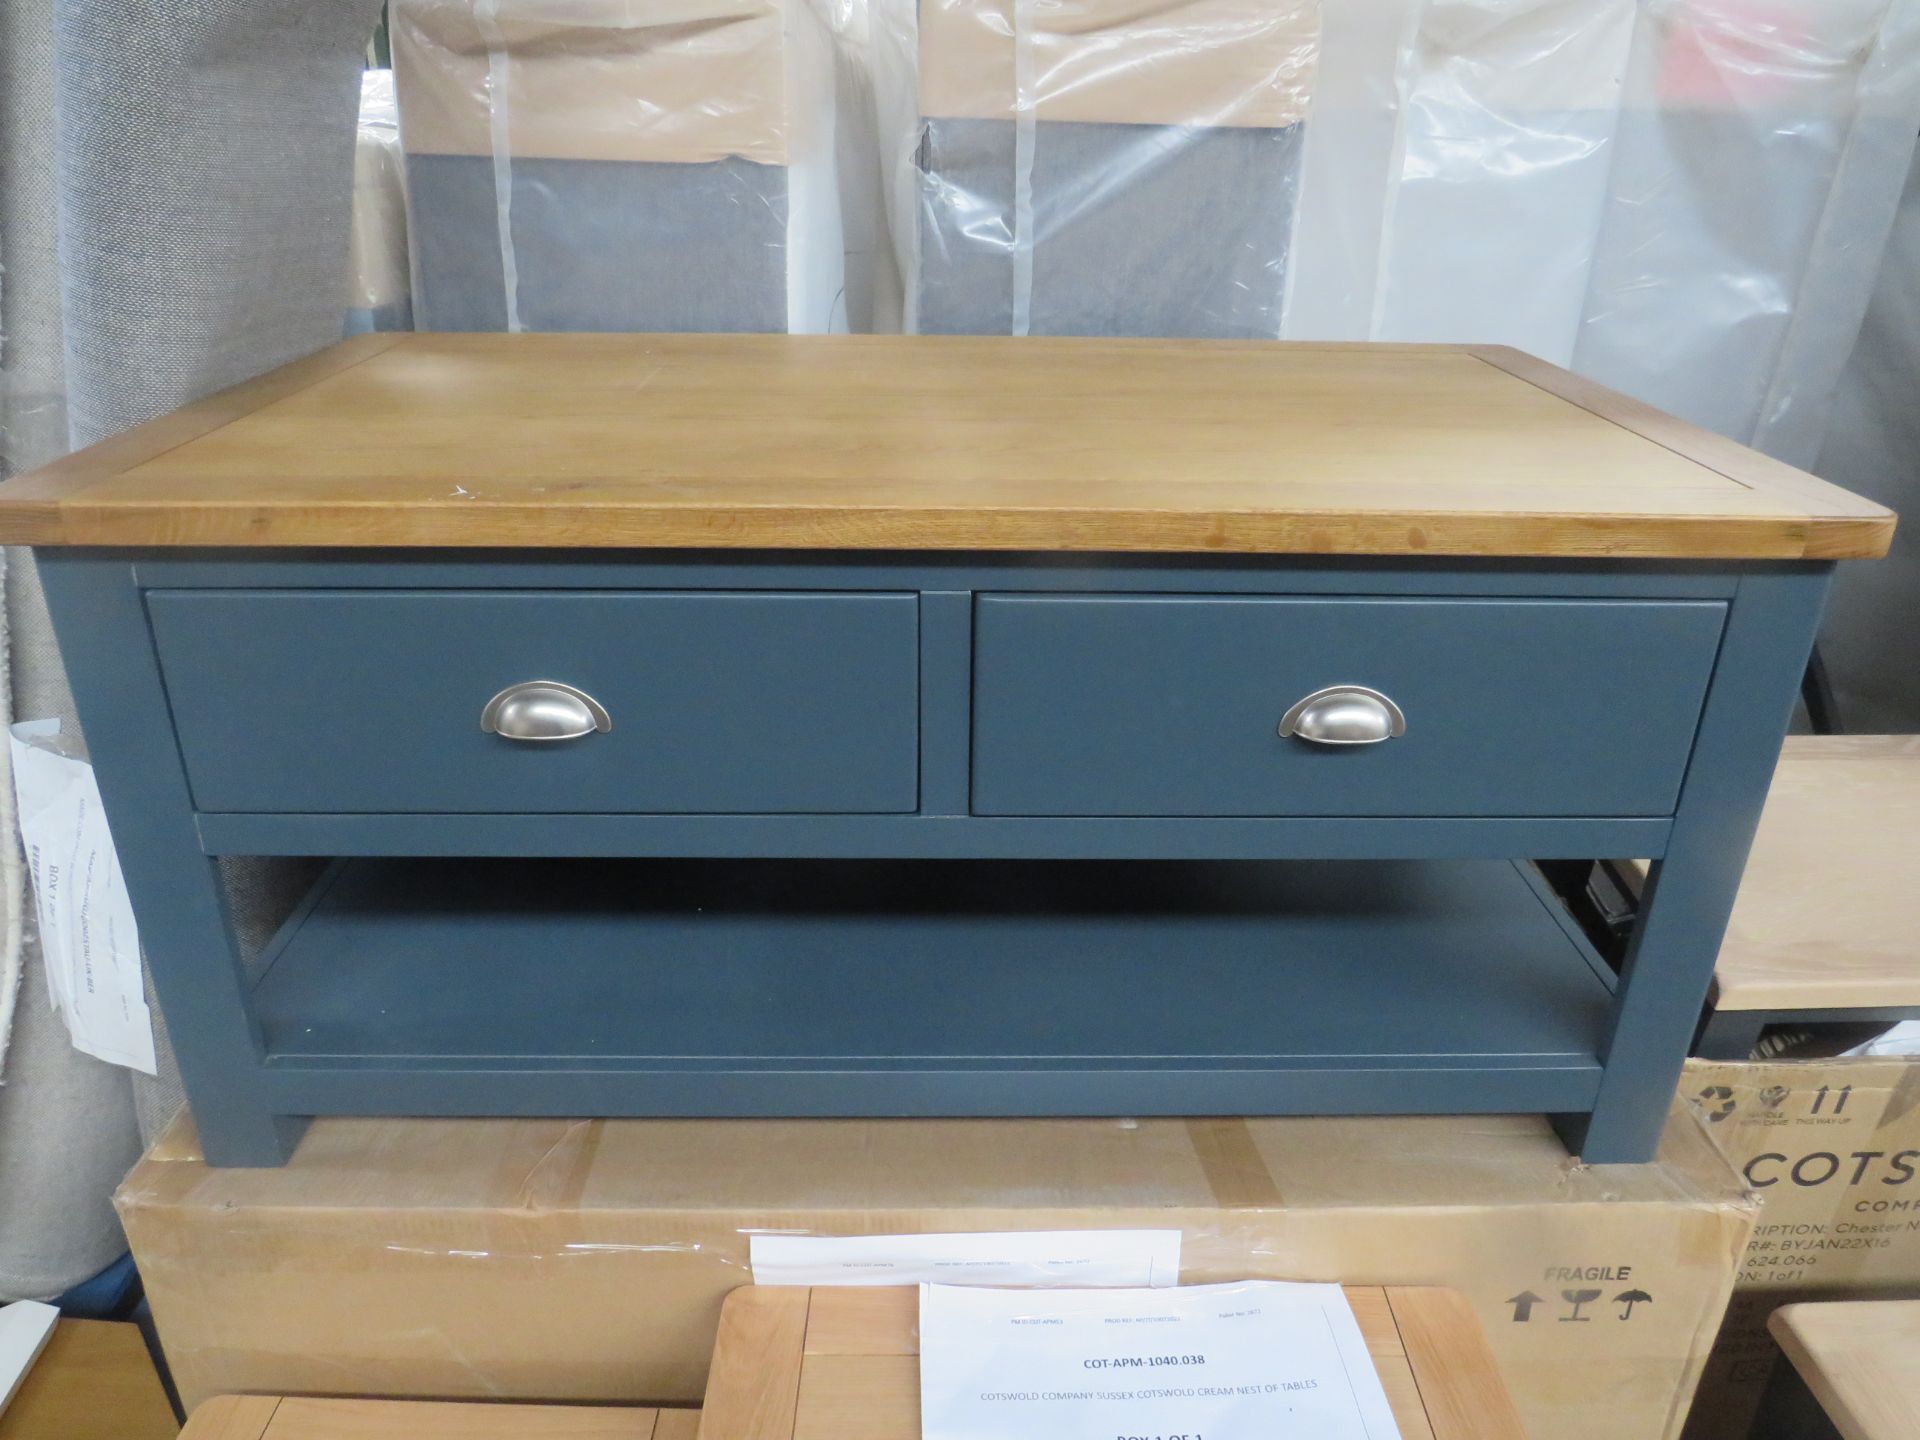 Cotswold Company Westcote Inky Blue Coffee Table with Drawers RRP Â£325.00 - This item looks to be